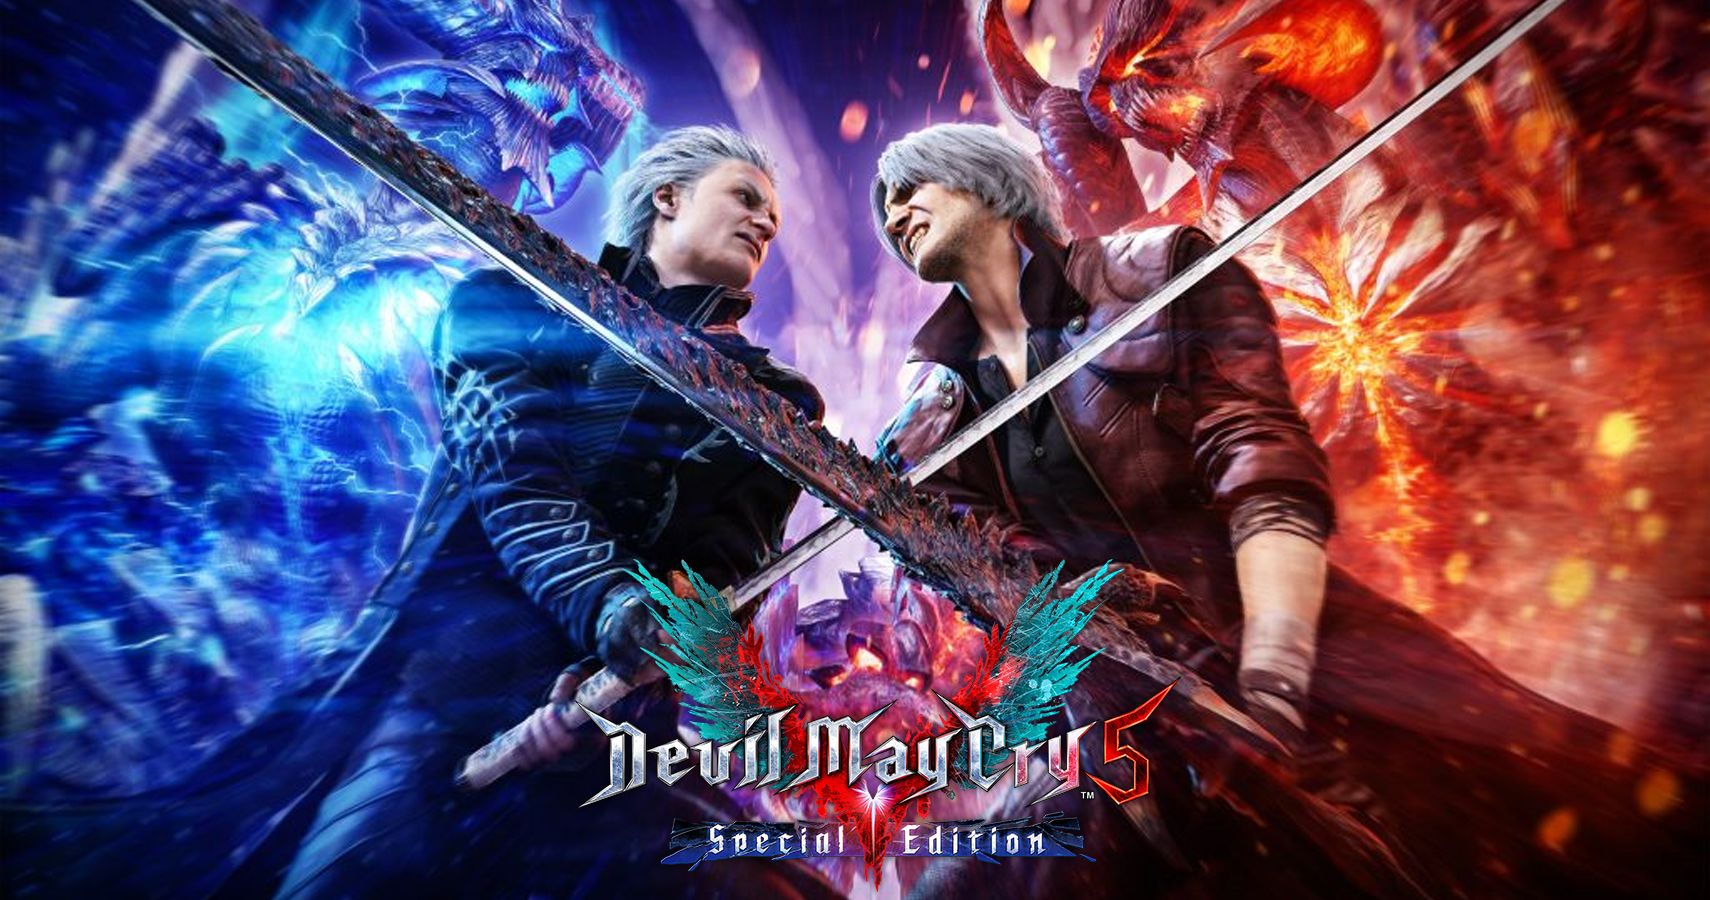 Devil May Cry 5s Vergil DLC Releases December 15 For PC PS4 and Xbox One